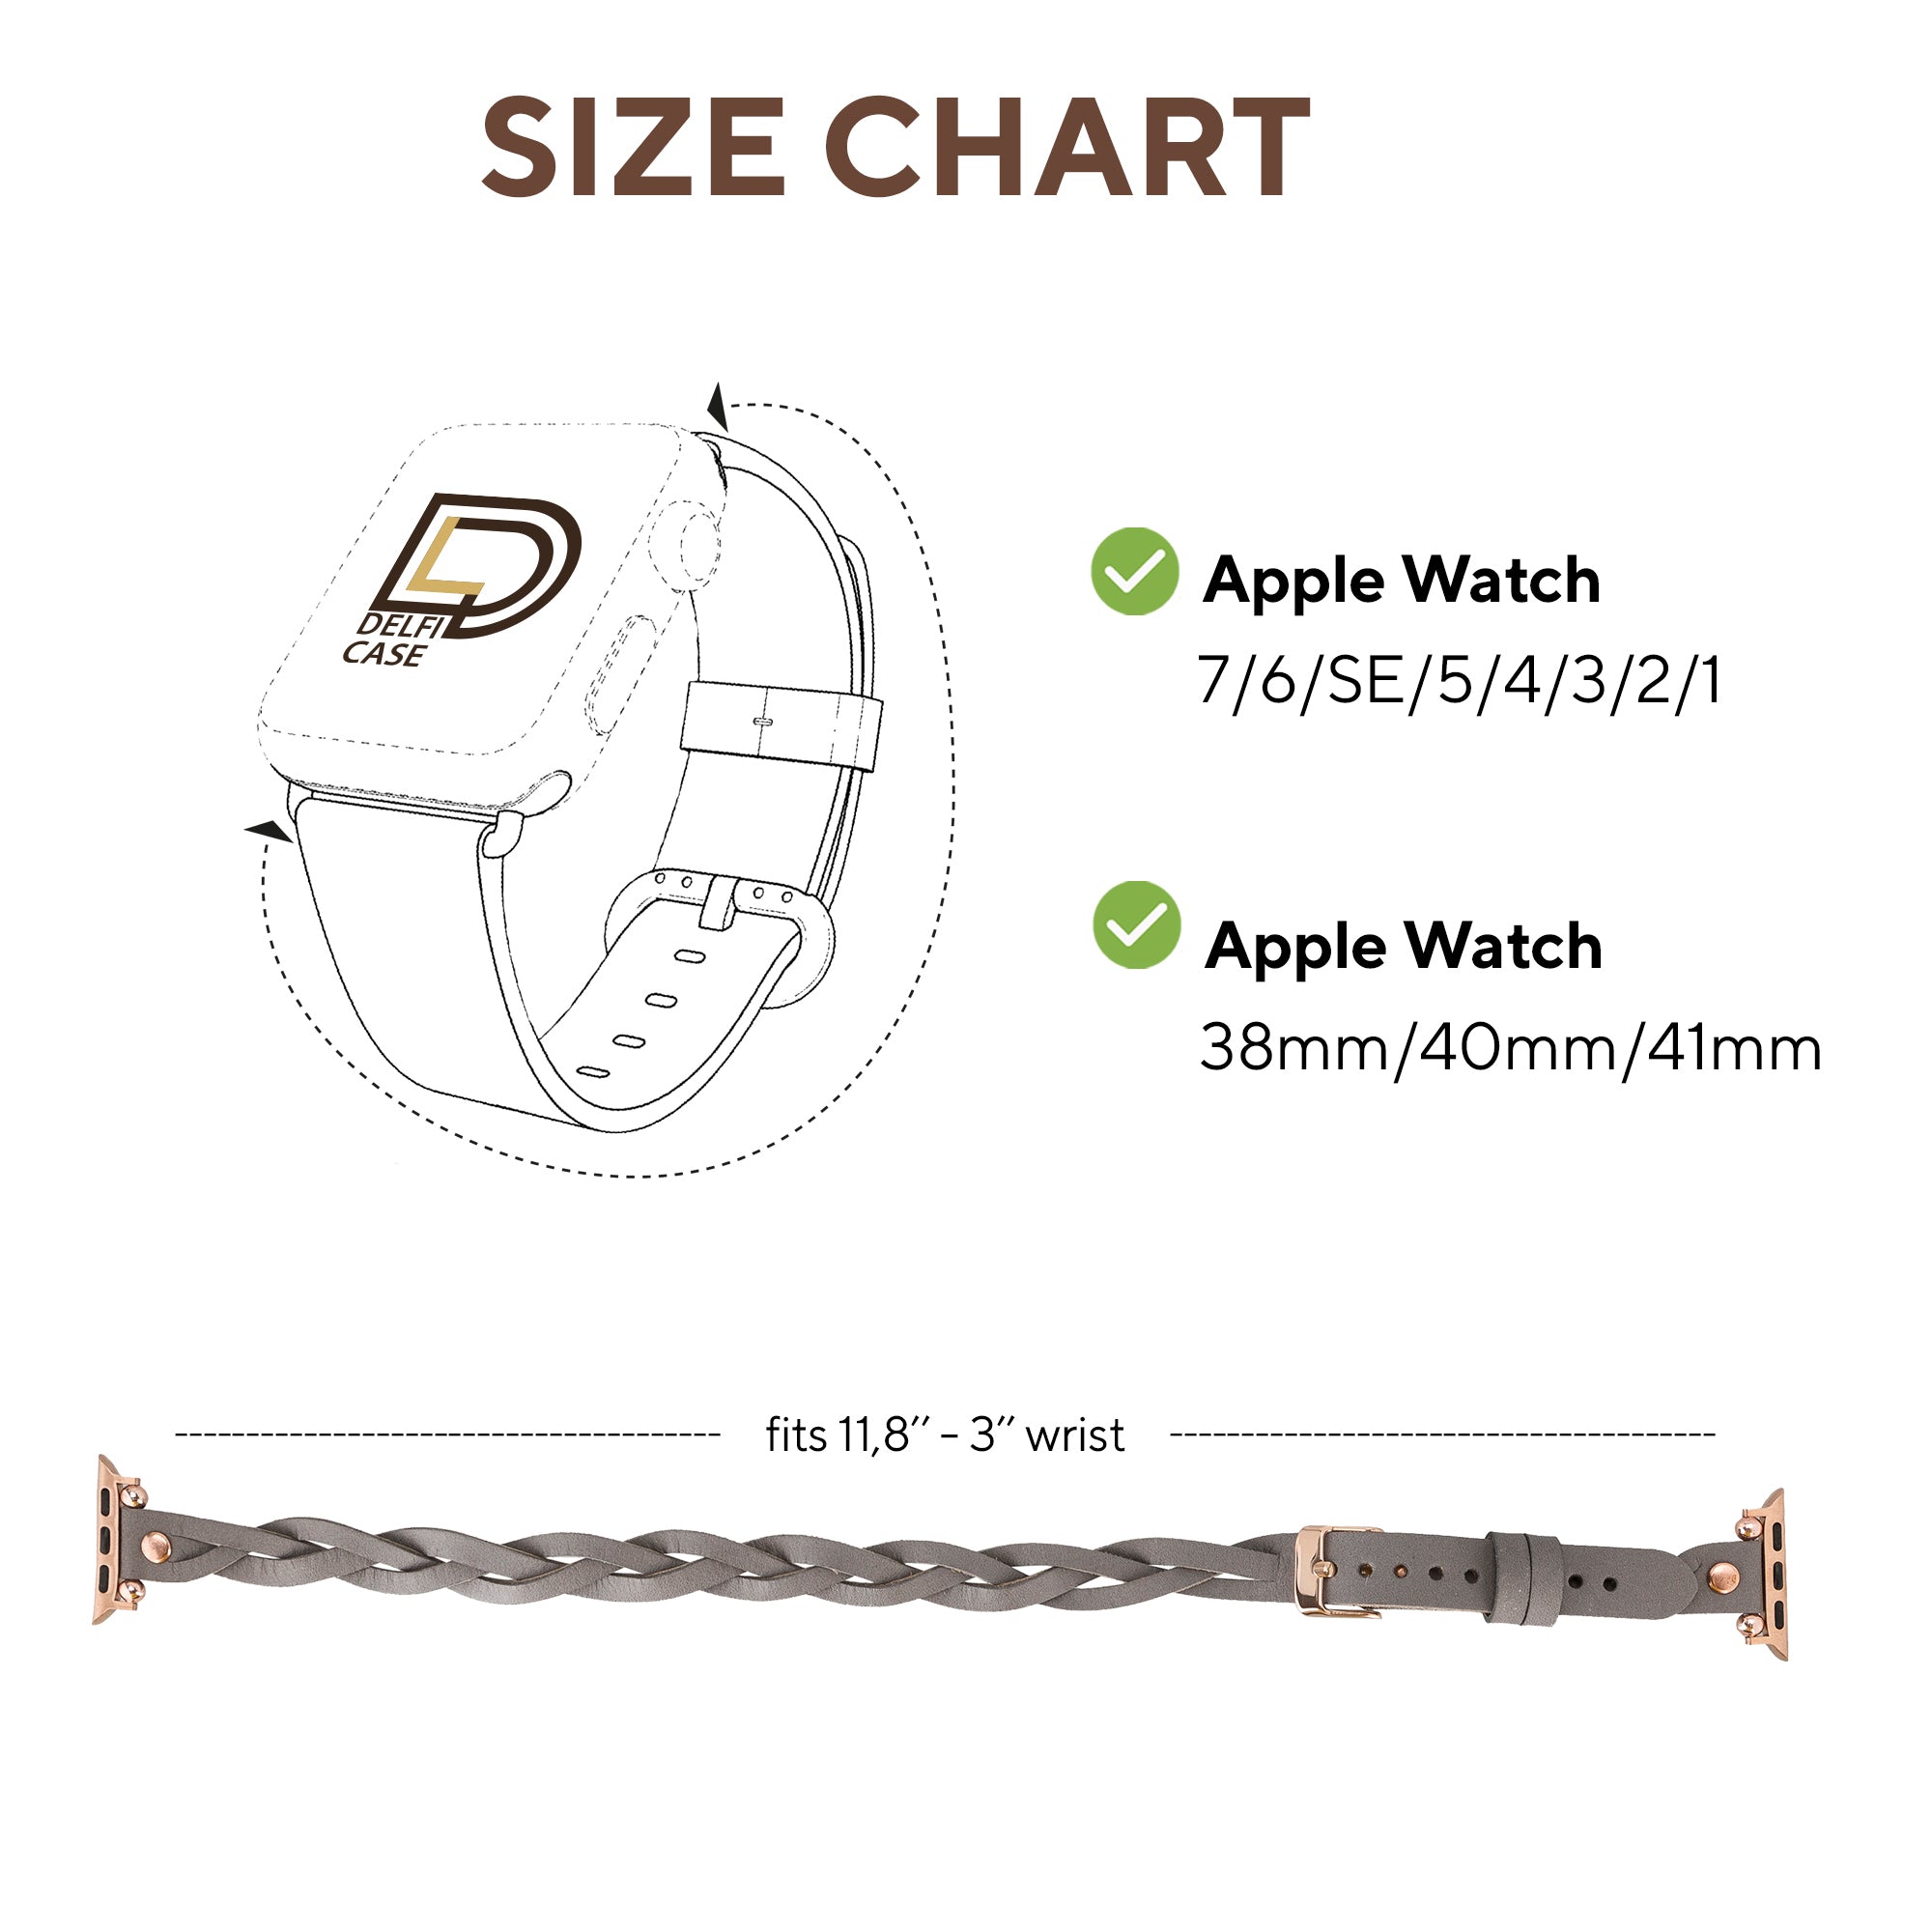 DelfiCase Sheffield Double Tour Watch Band for Apple Watch & Fitbit/Sense 80